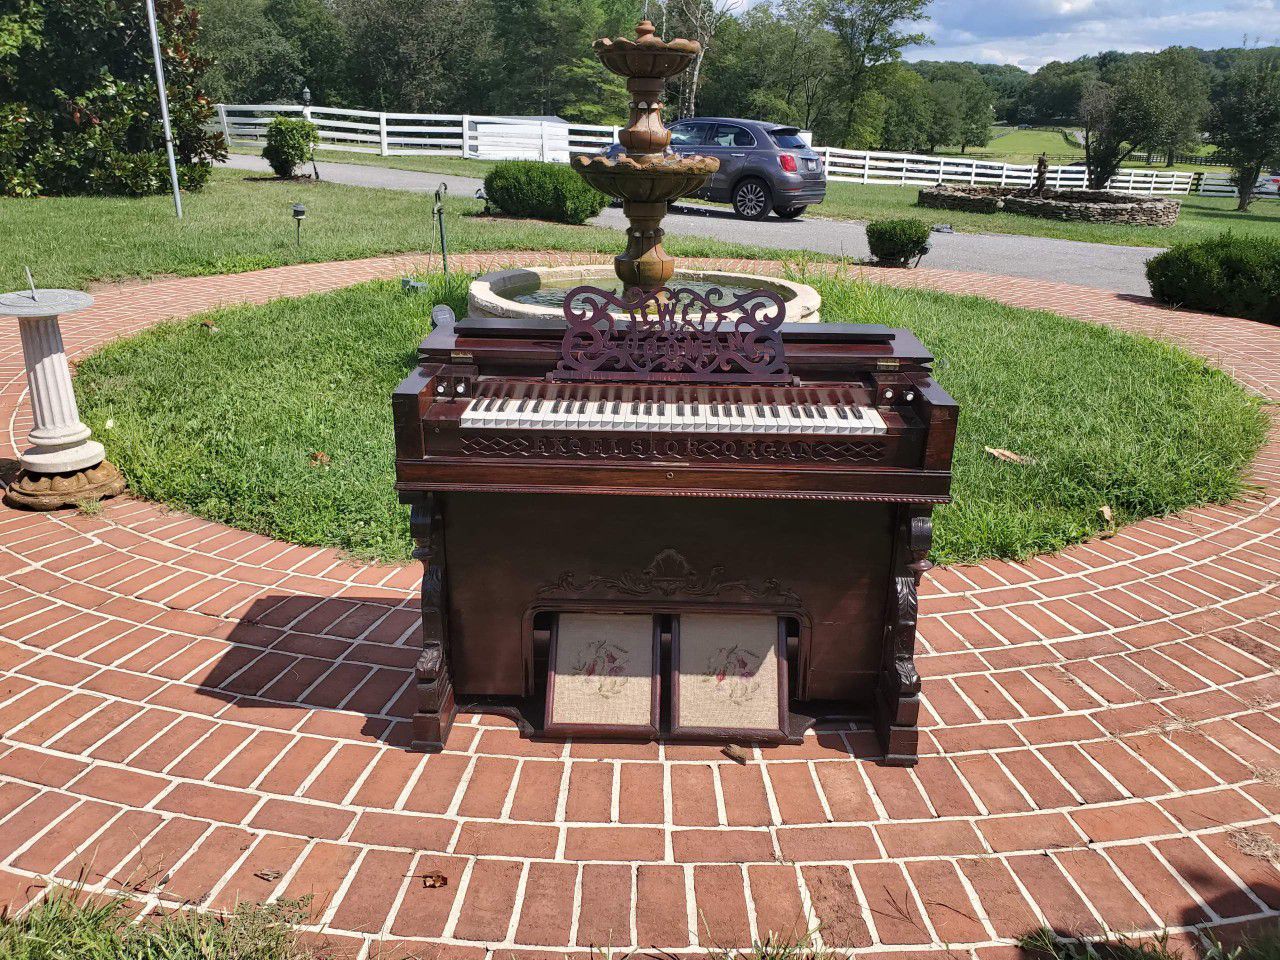 Jewett & Goodman Excelsior Organ Piano with bench